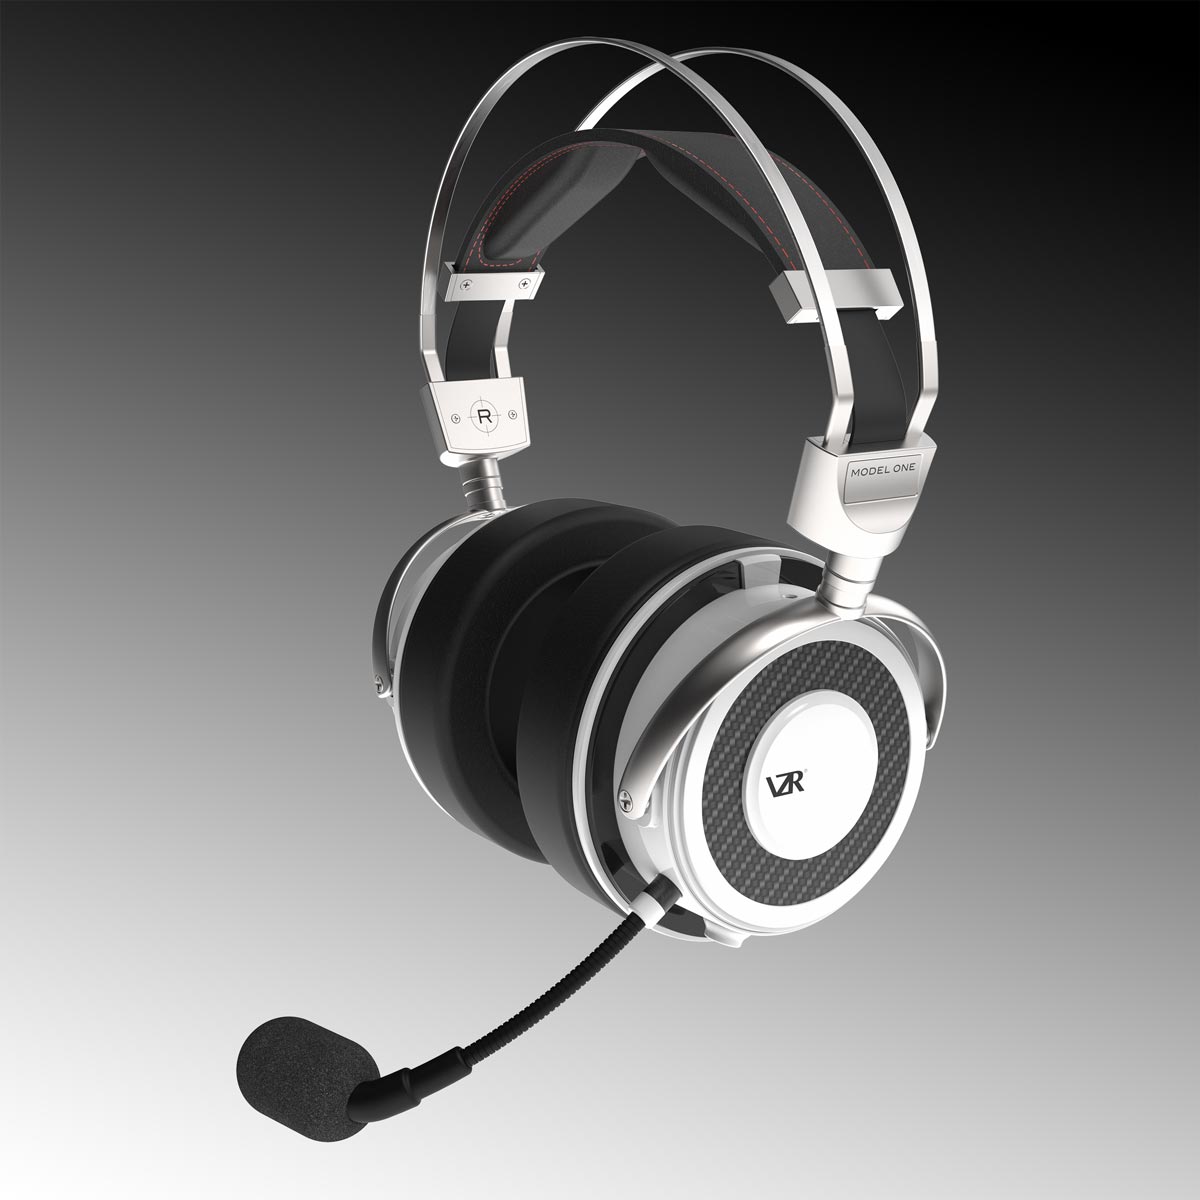 VZR Model One headset for gamers and audiophiles